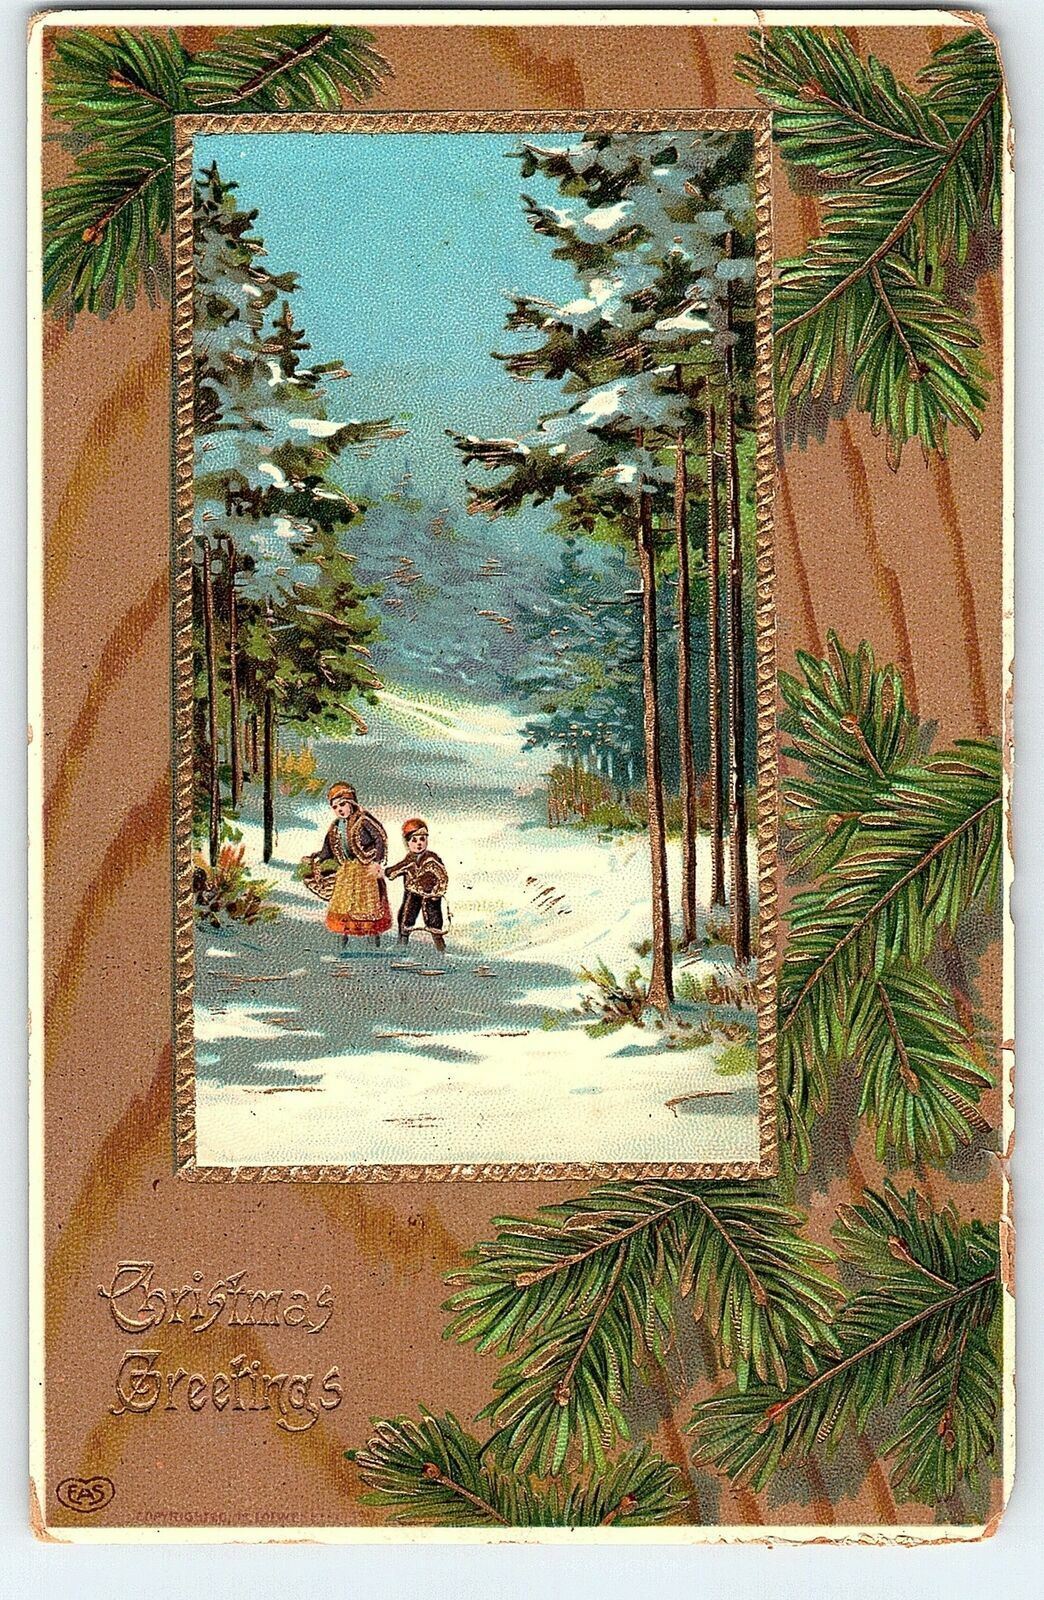 Gold Tone Embossed Christmas Greetings Germany 1911 Window View Postcard A1